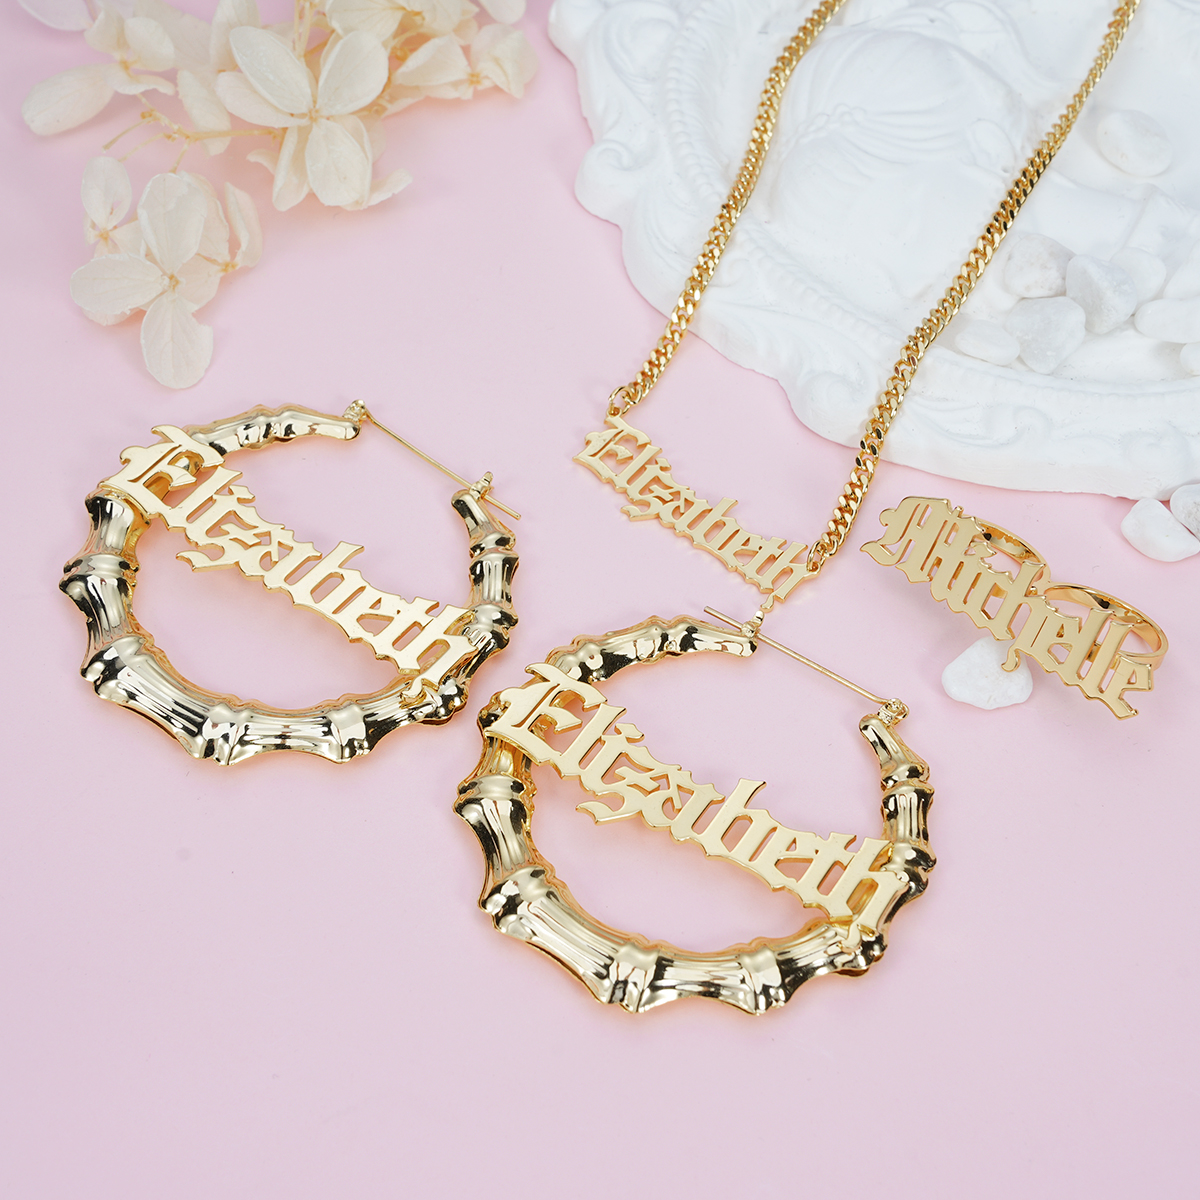 Old English Nameplate Personalized Jewelry Set 3pcs Name Necklace Name Earrings And Ring